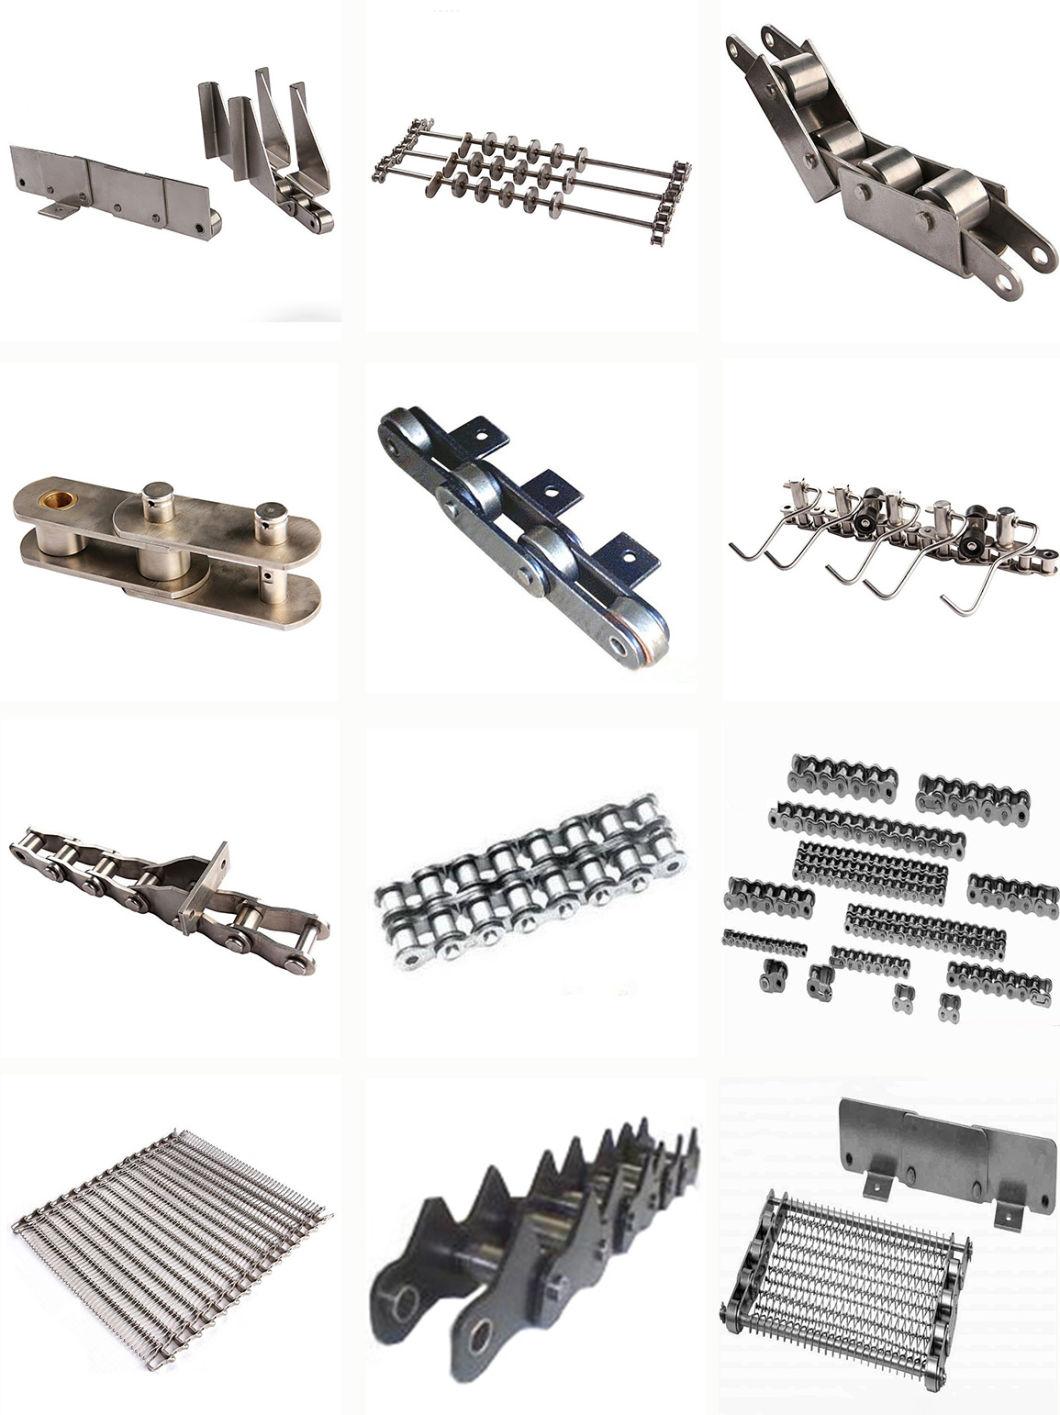 DIN ANSI High Quality Precision Industrial Transmission Conveyor Roller Chain with High Strength